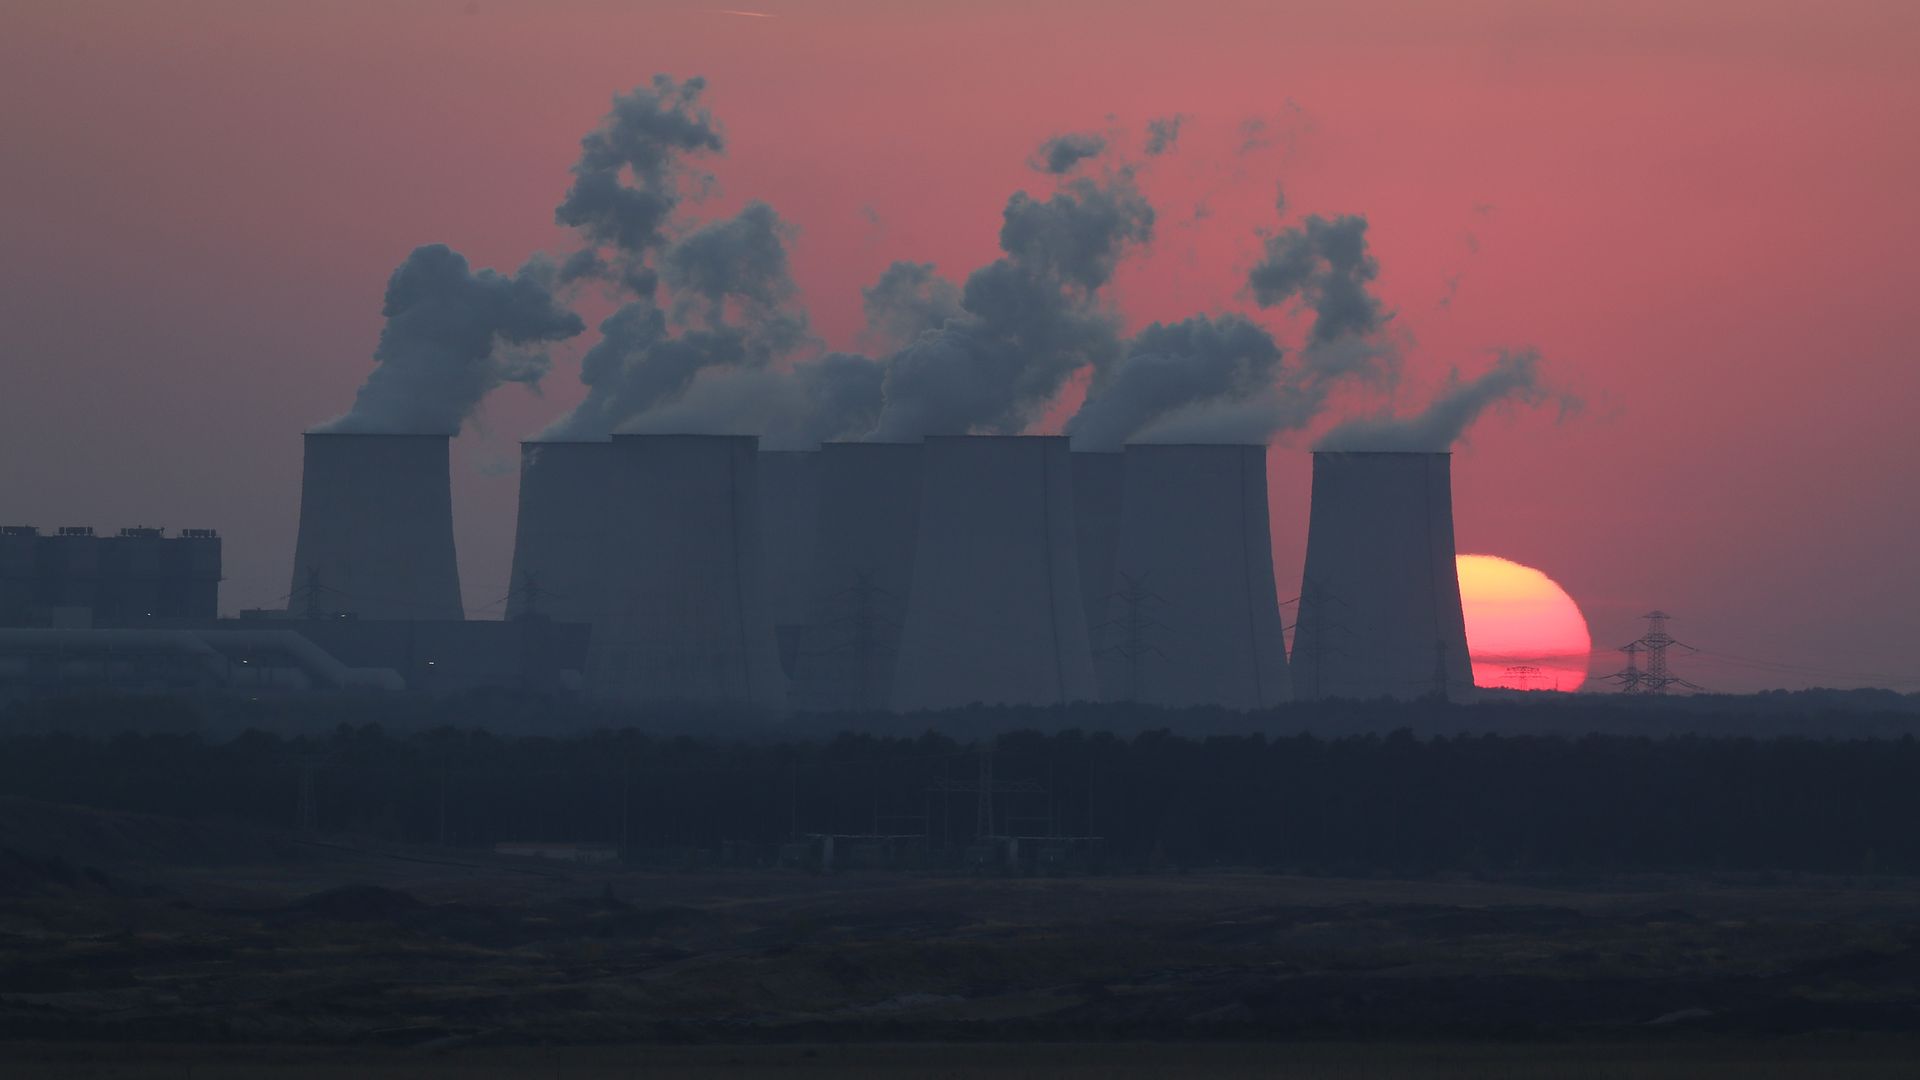 A power plant producing lots of smoke in front of a beautiful, red sunset